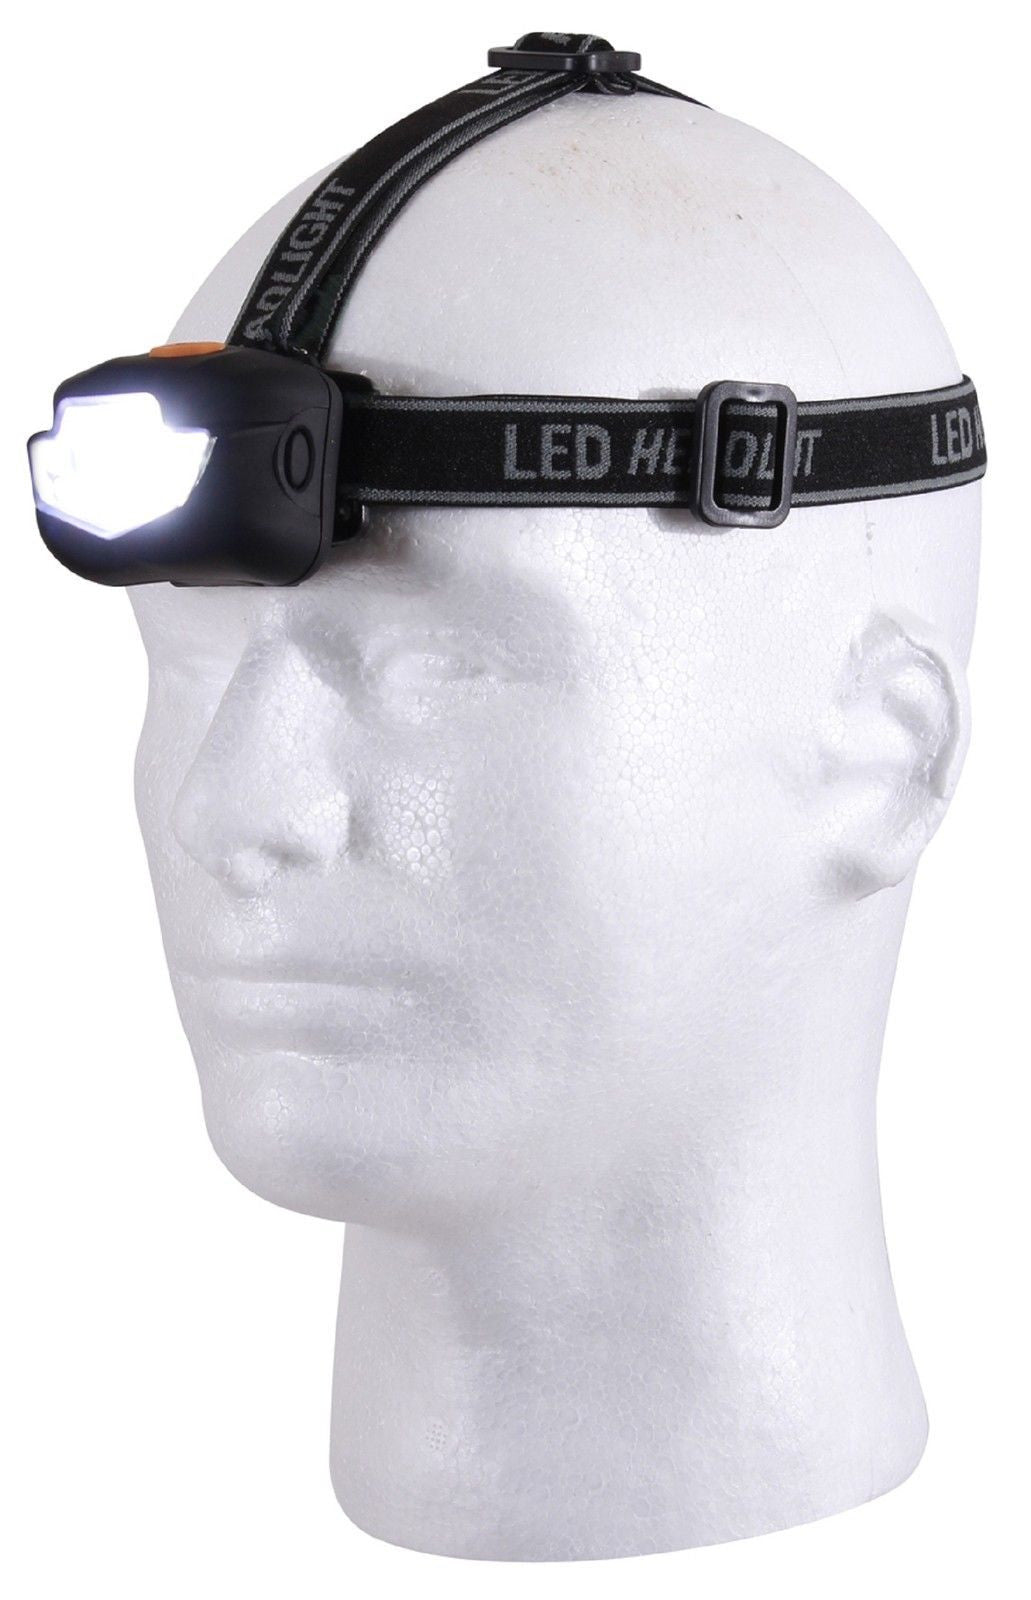 Rothco Adjustable 3-Stage LED Headlamp With Red Light Option & Padded Back 236